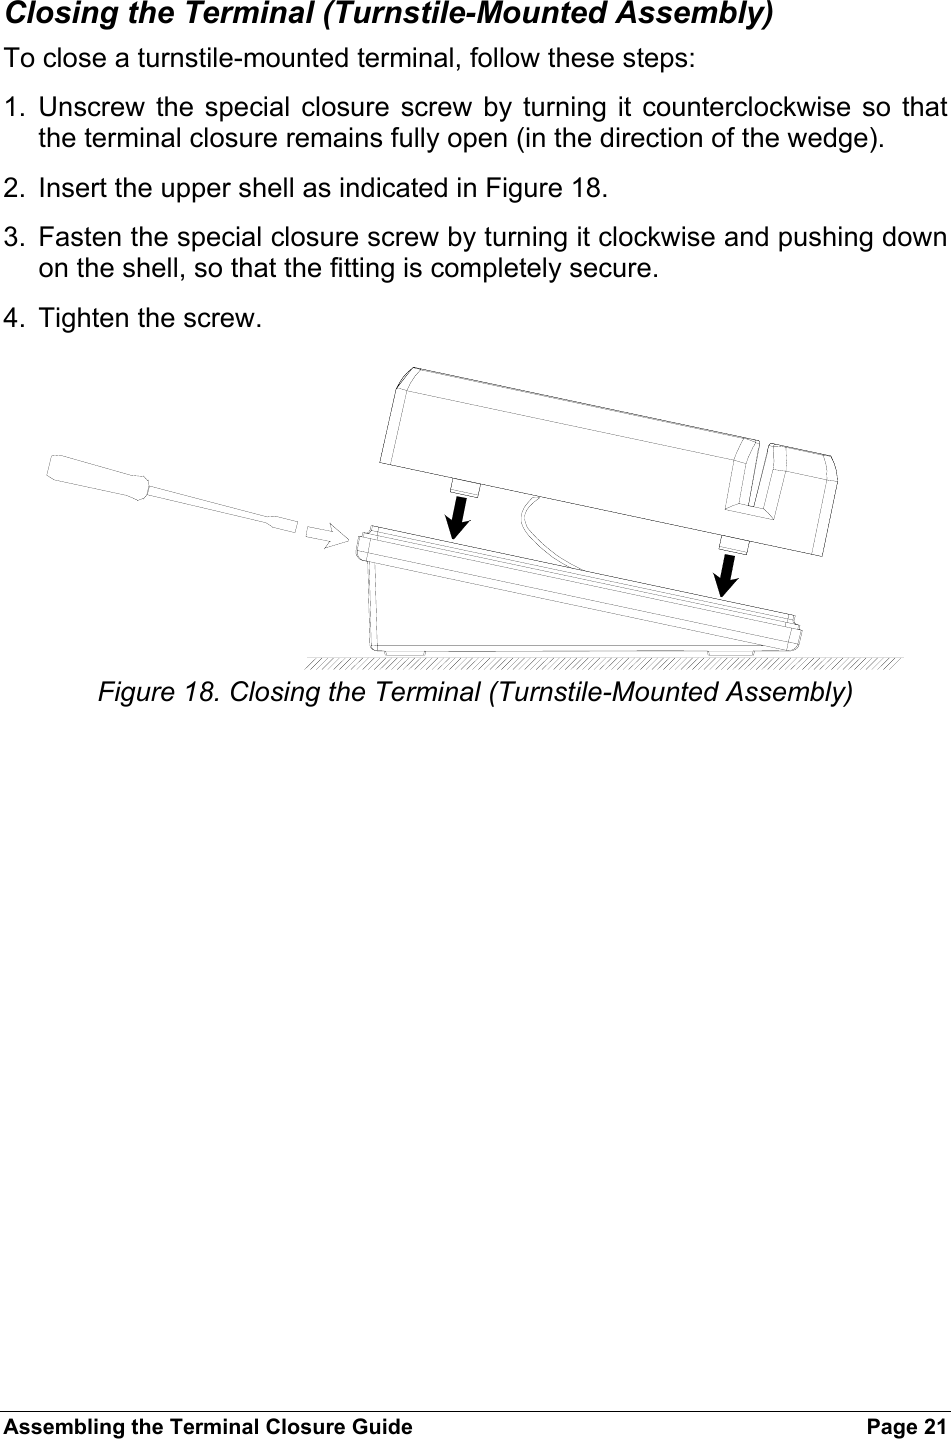 Assembling the Terminal Closure Guide  Page 21 Closing the Terminal (Turnstile-Mounted Assembly) To close a turnstile-mounted terminal, follow these steps: 1. Unscrew the special closure screw by turning it counterclockwise so that the terminal closure remains fully open (in the direction of the wedge). 2.  Insert the upper shell as indicated in Figure 18. 3.  Fasten the special closure screw by turning it clockwise and pushing down on the shell, so that the fitting is completely secure. 4.  Tighten the screw.   Figure 18. Closing the Terminal (Turnstile-Mounted Assembly) 